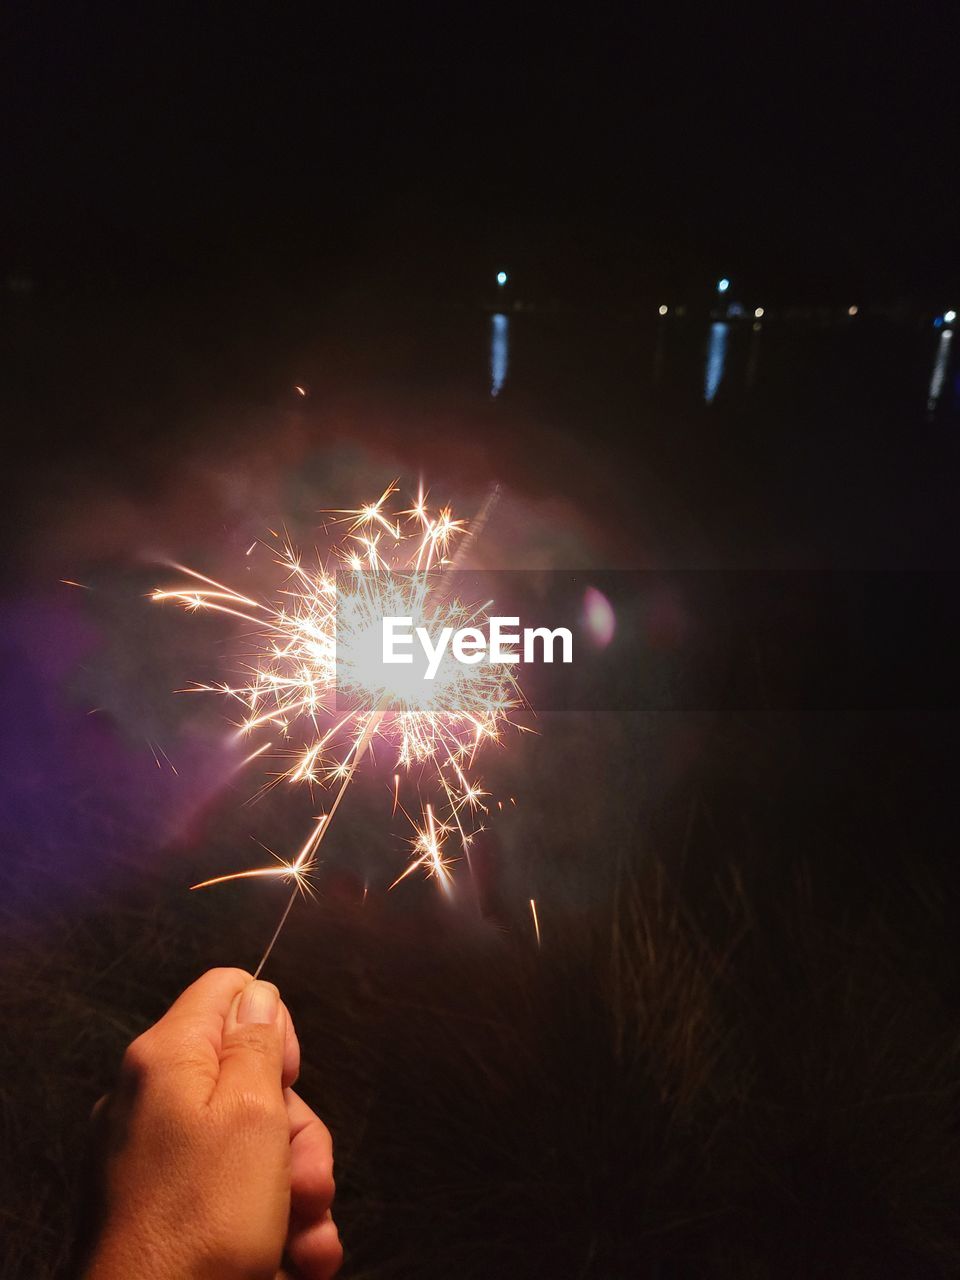 LOW ANGLE VIEW OF HAND HOLDING ILLUMINATED FIREWORK DISPLAY